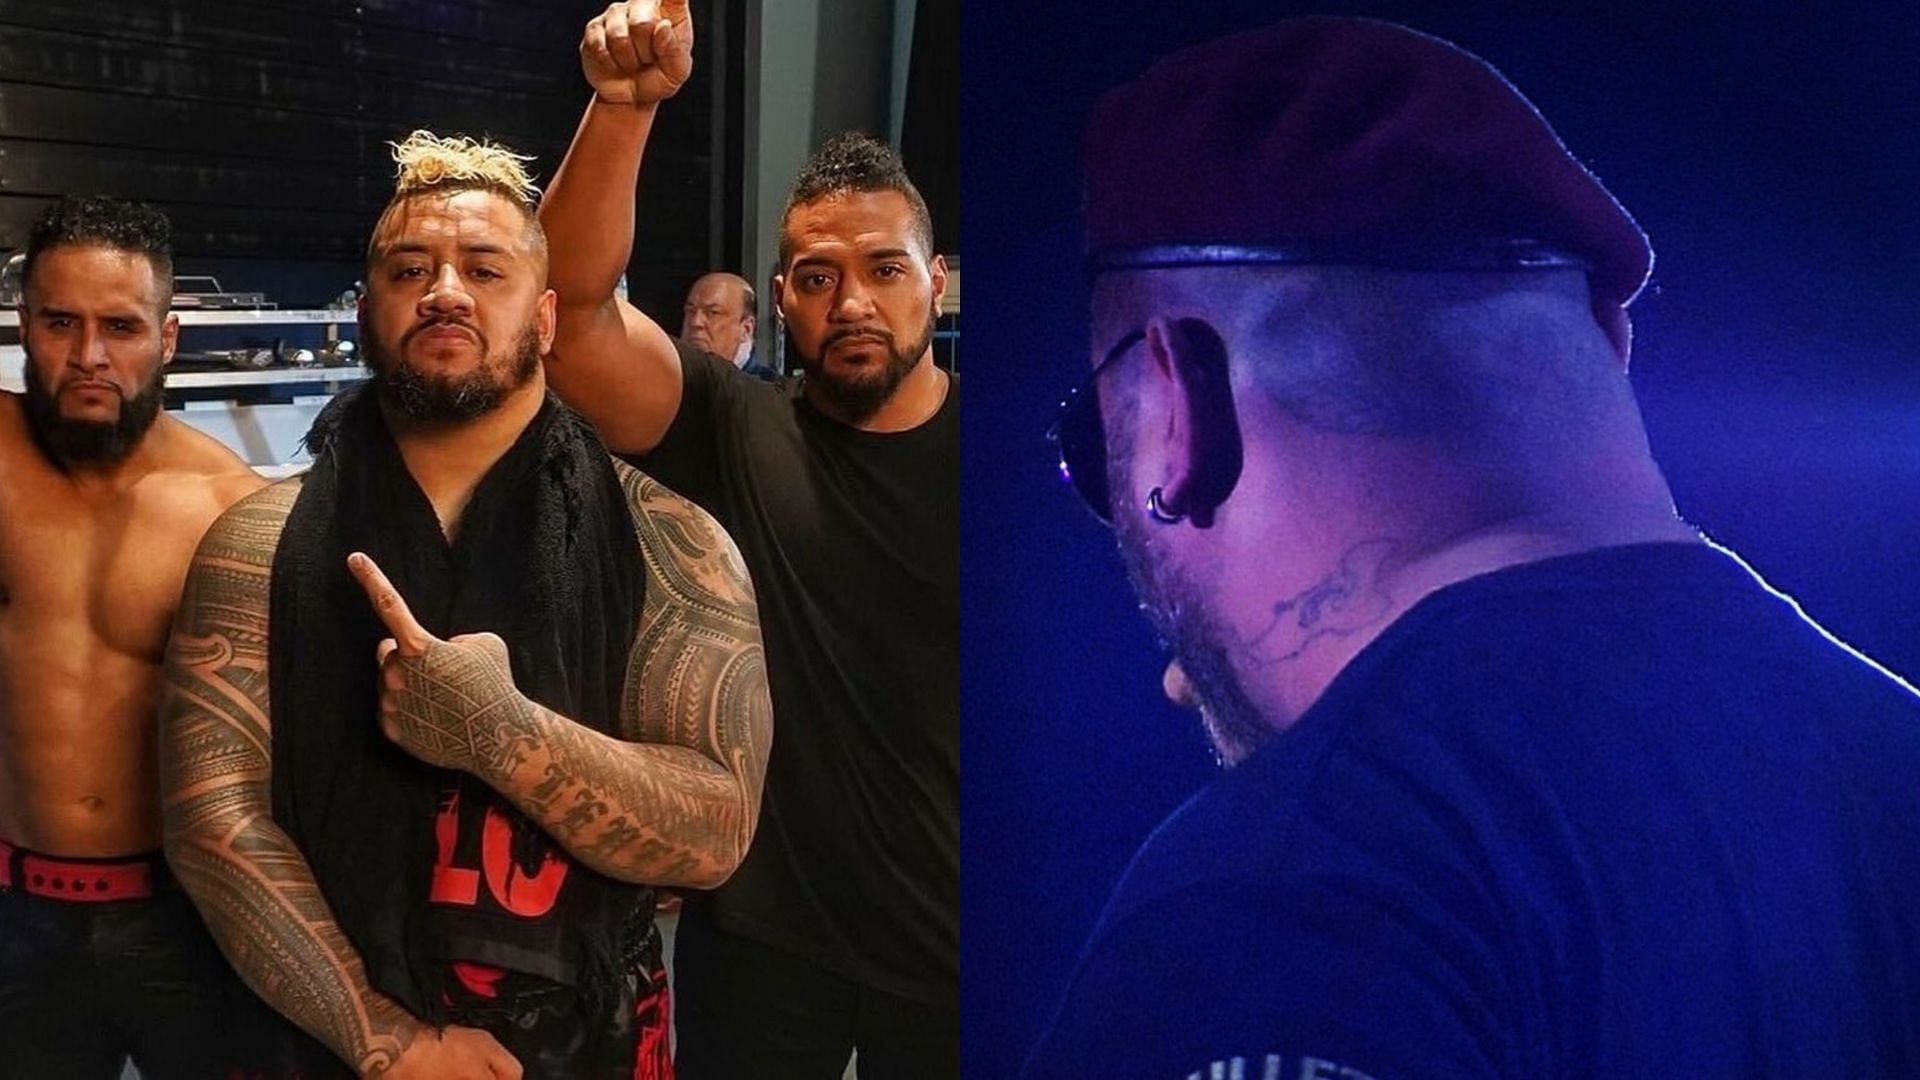 Will more Tongan wrestlers join The Bloodline?